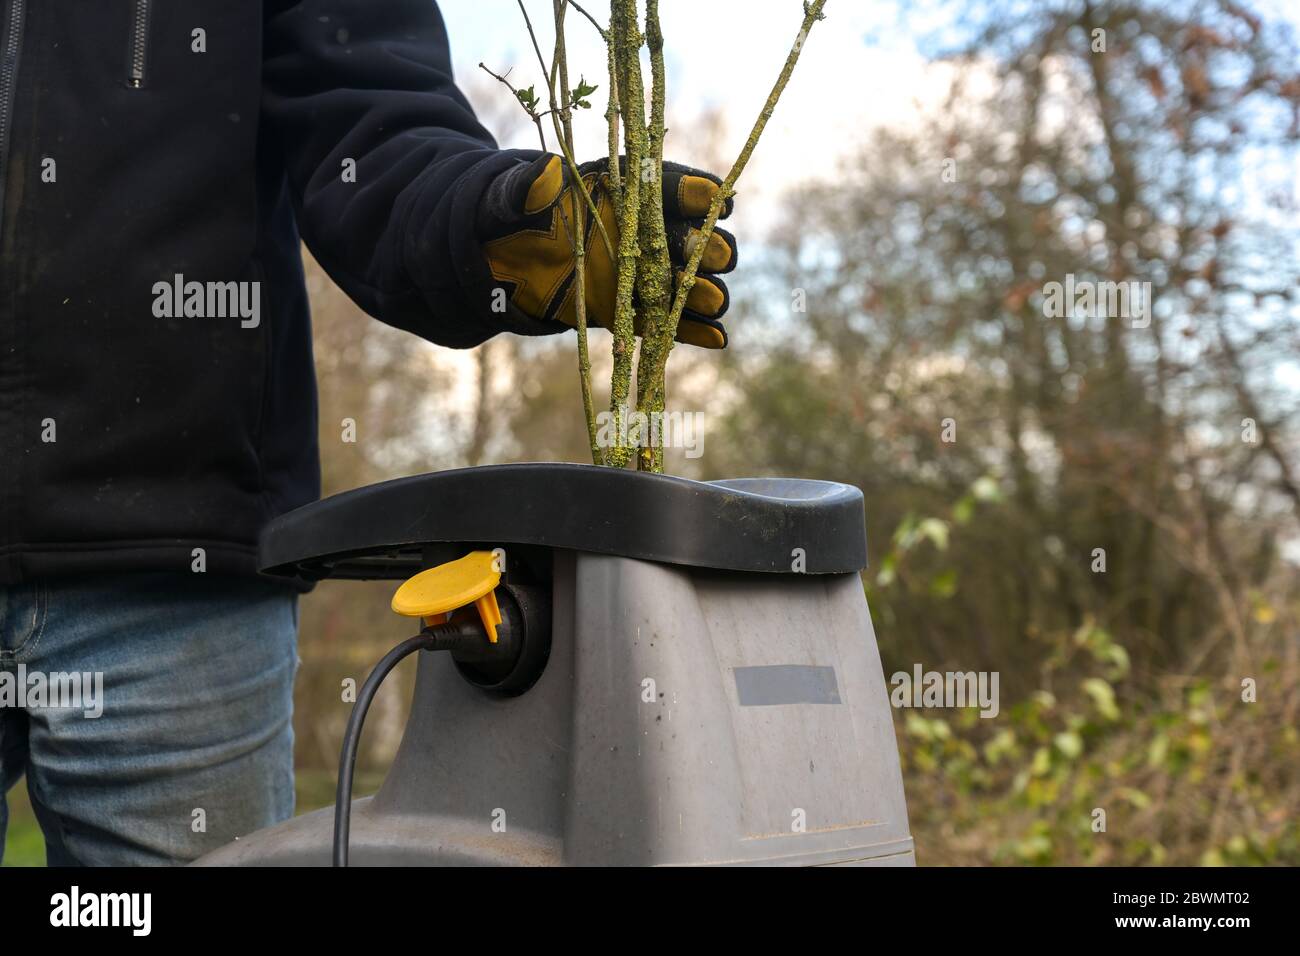 Man is chopping pruning waste with an electric garden shredder, clearing up old branches, copy space Stock Photo